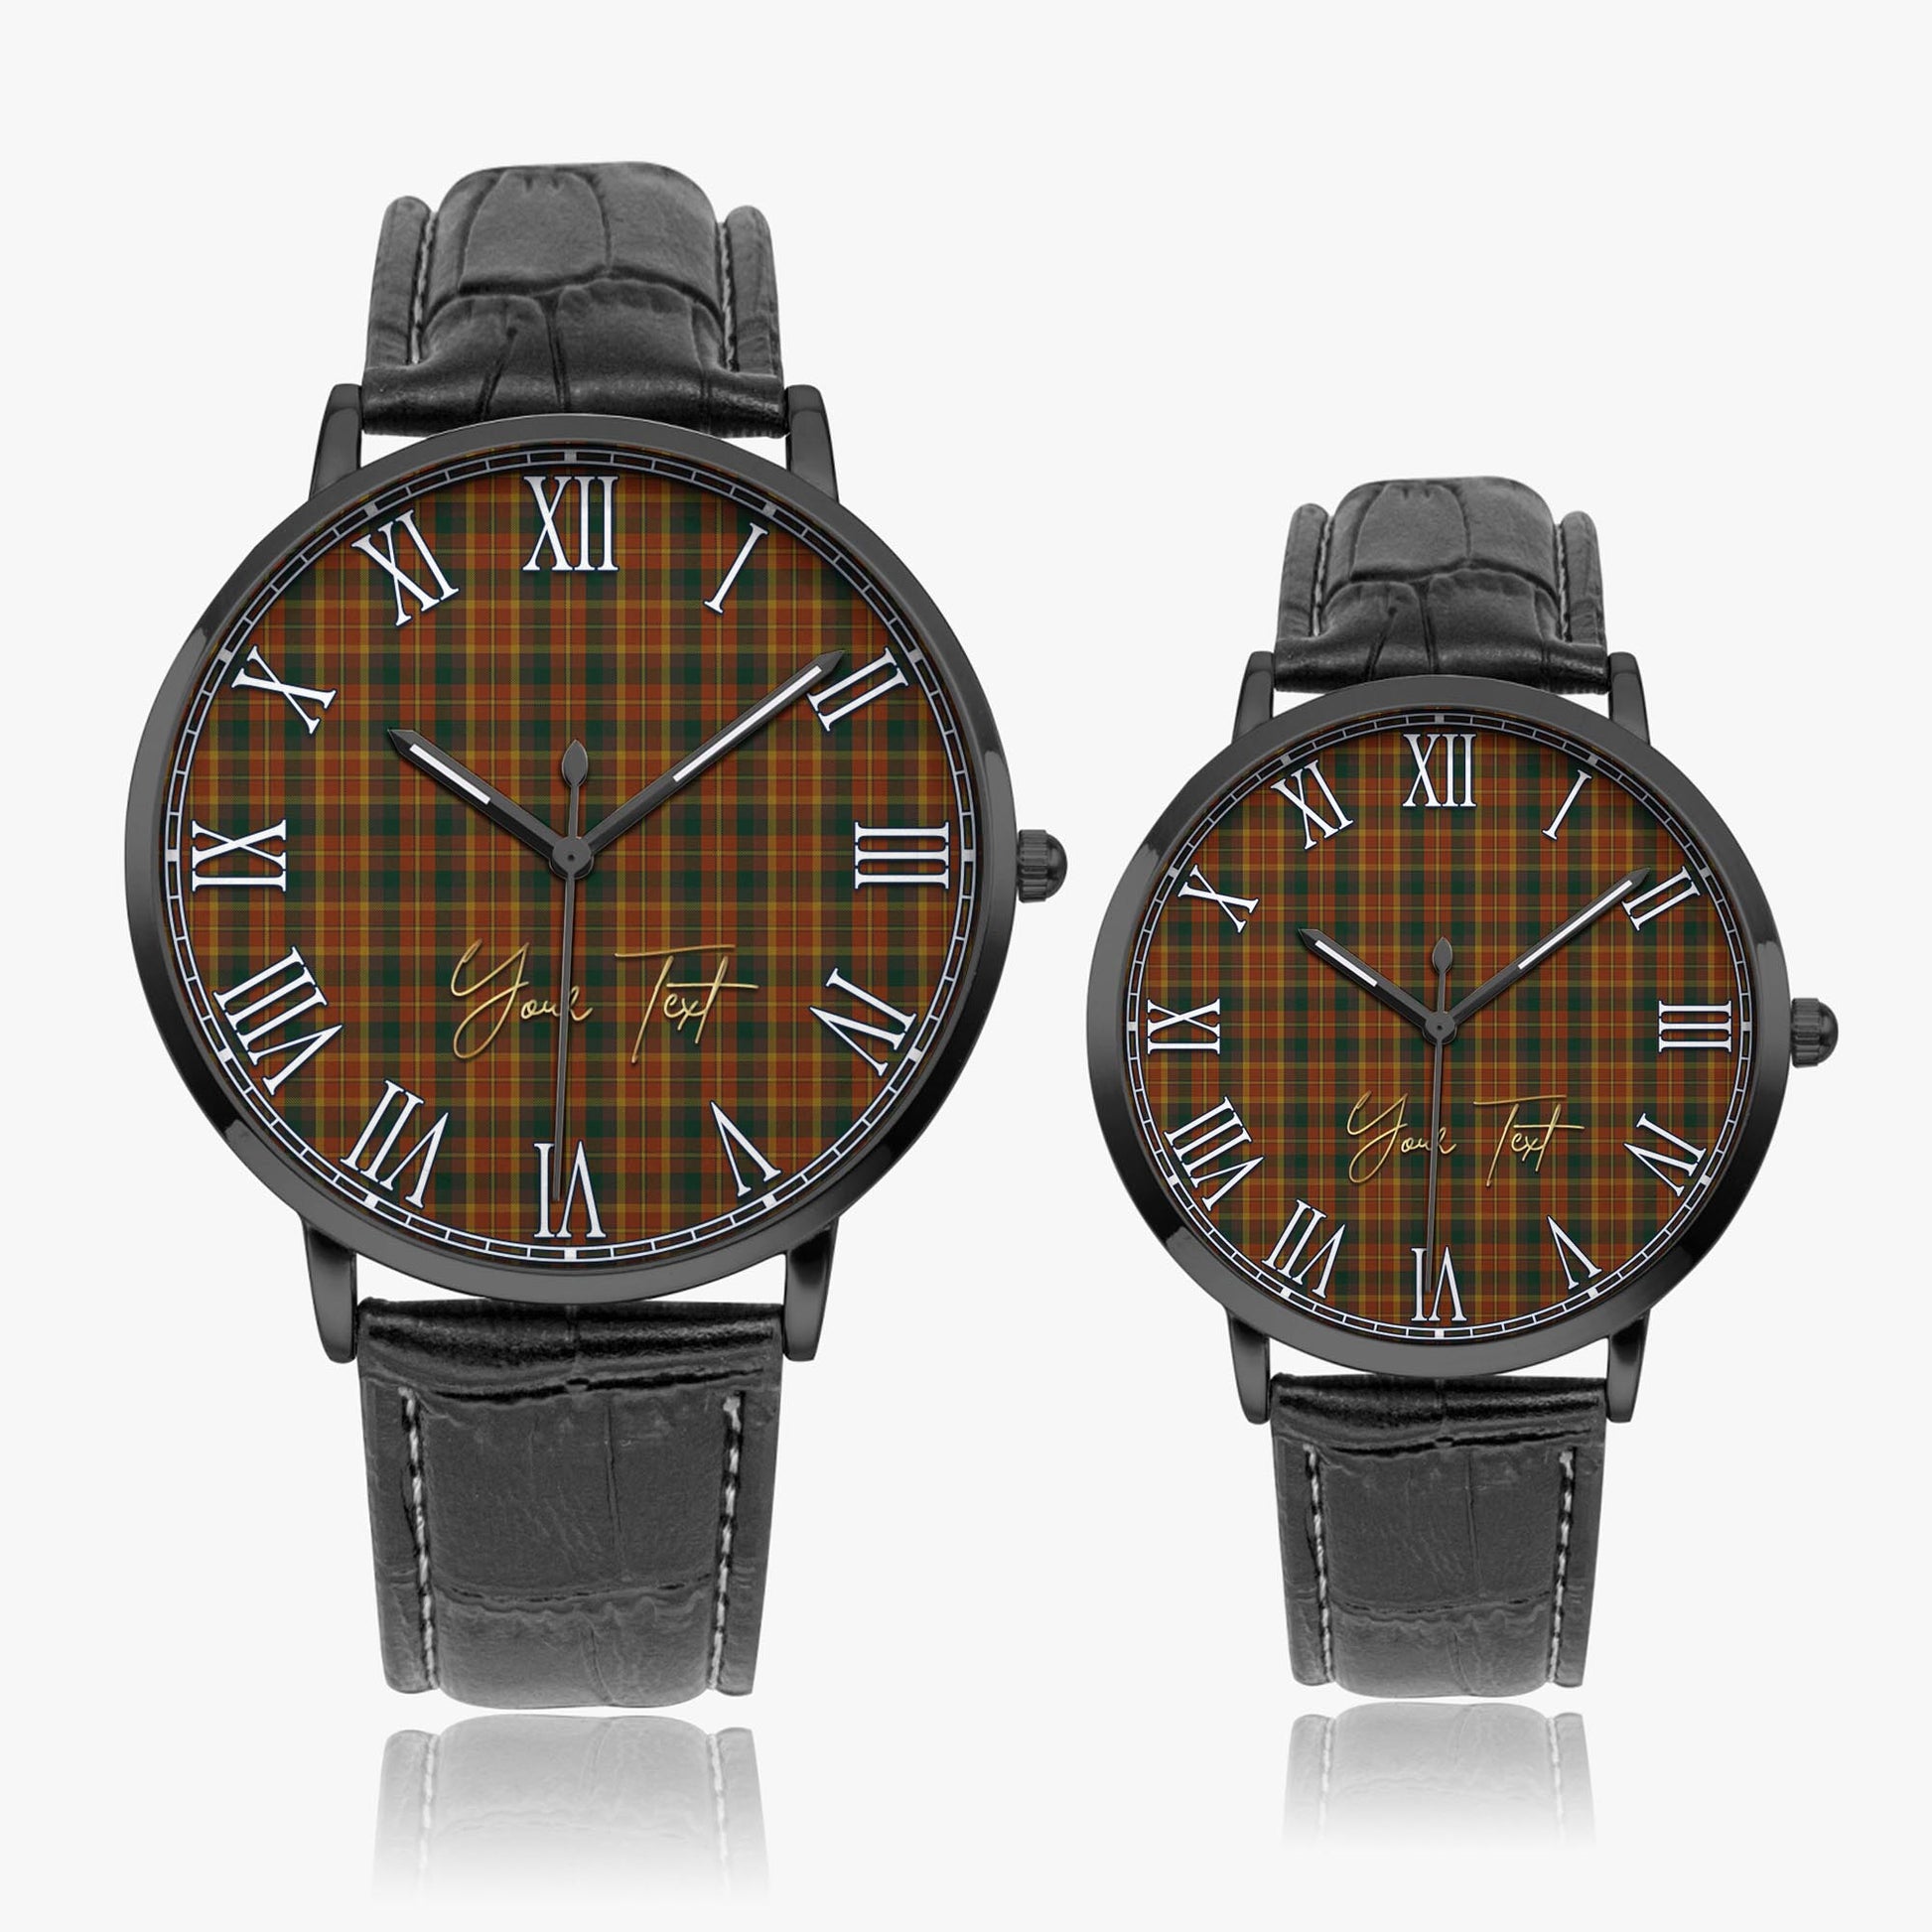 Monaghan County Ireland Tartan Personalized Your Text Leather Trap Quartz Watch Ultra Thin Black Case With Black Leather Strap - Tartanvibesclothing